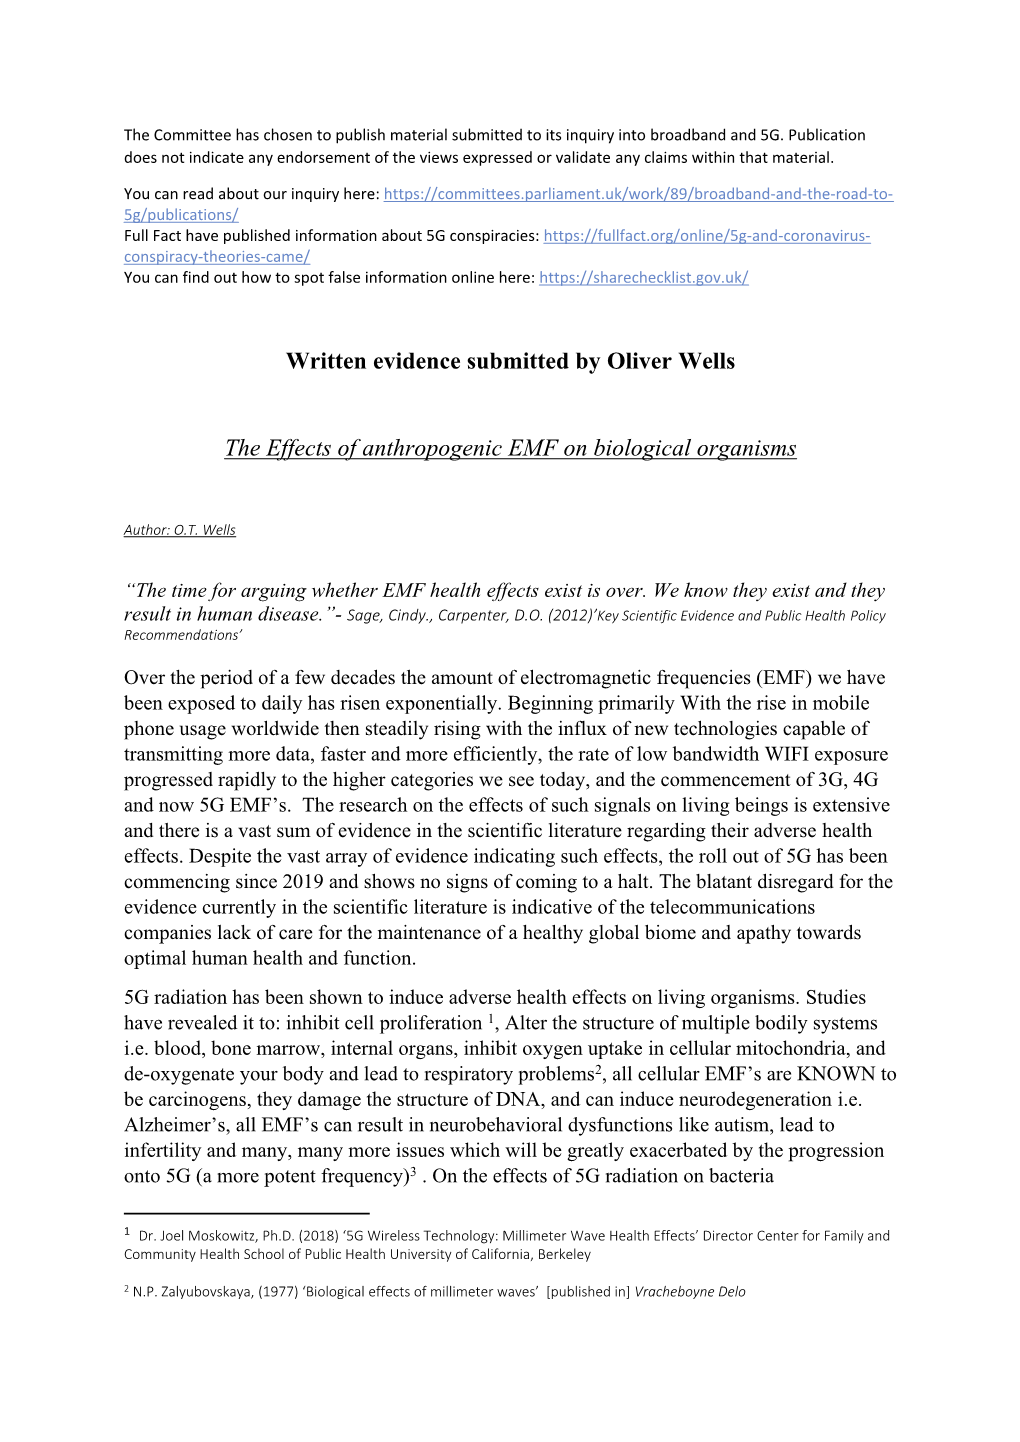 Written Evidence Submitted by Oliver Wells the Effects of Anthropogenic